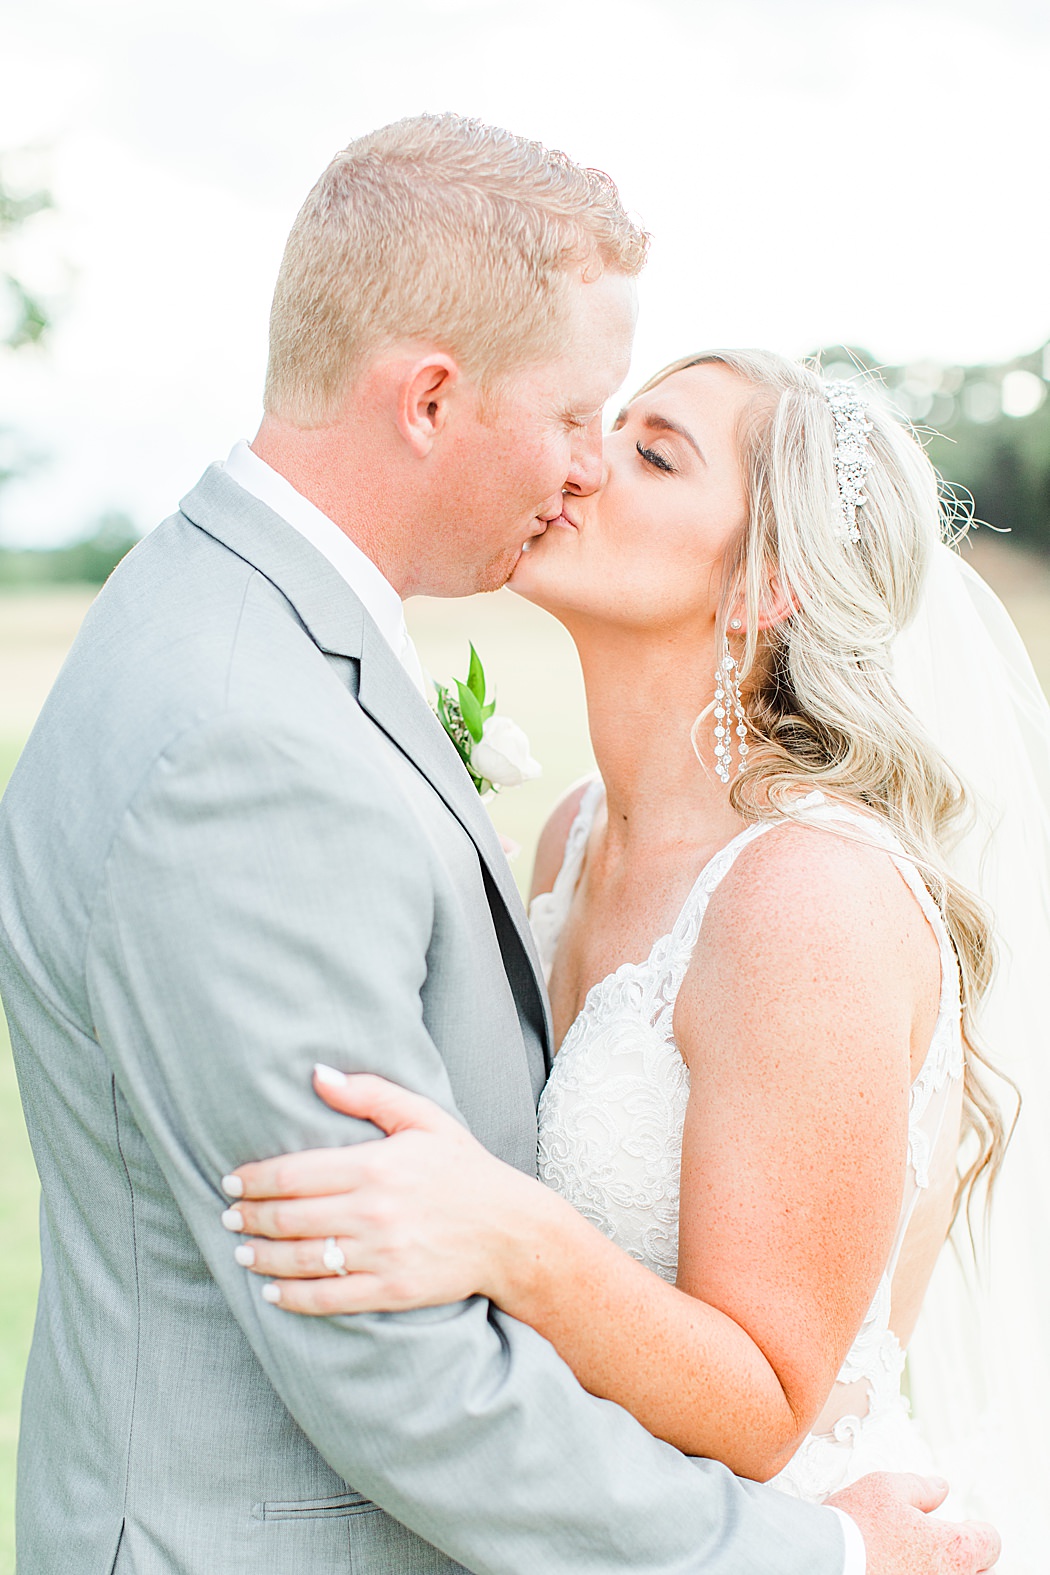 Summer Wedding at The Lodge at Country Inn Cottages in Fredericksburg Texas by Allison Jeffers Photography 0099